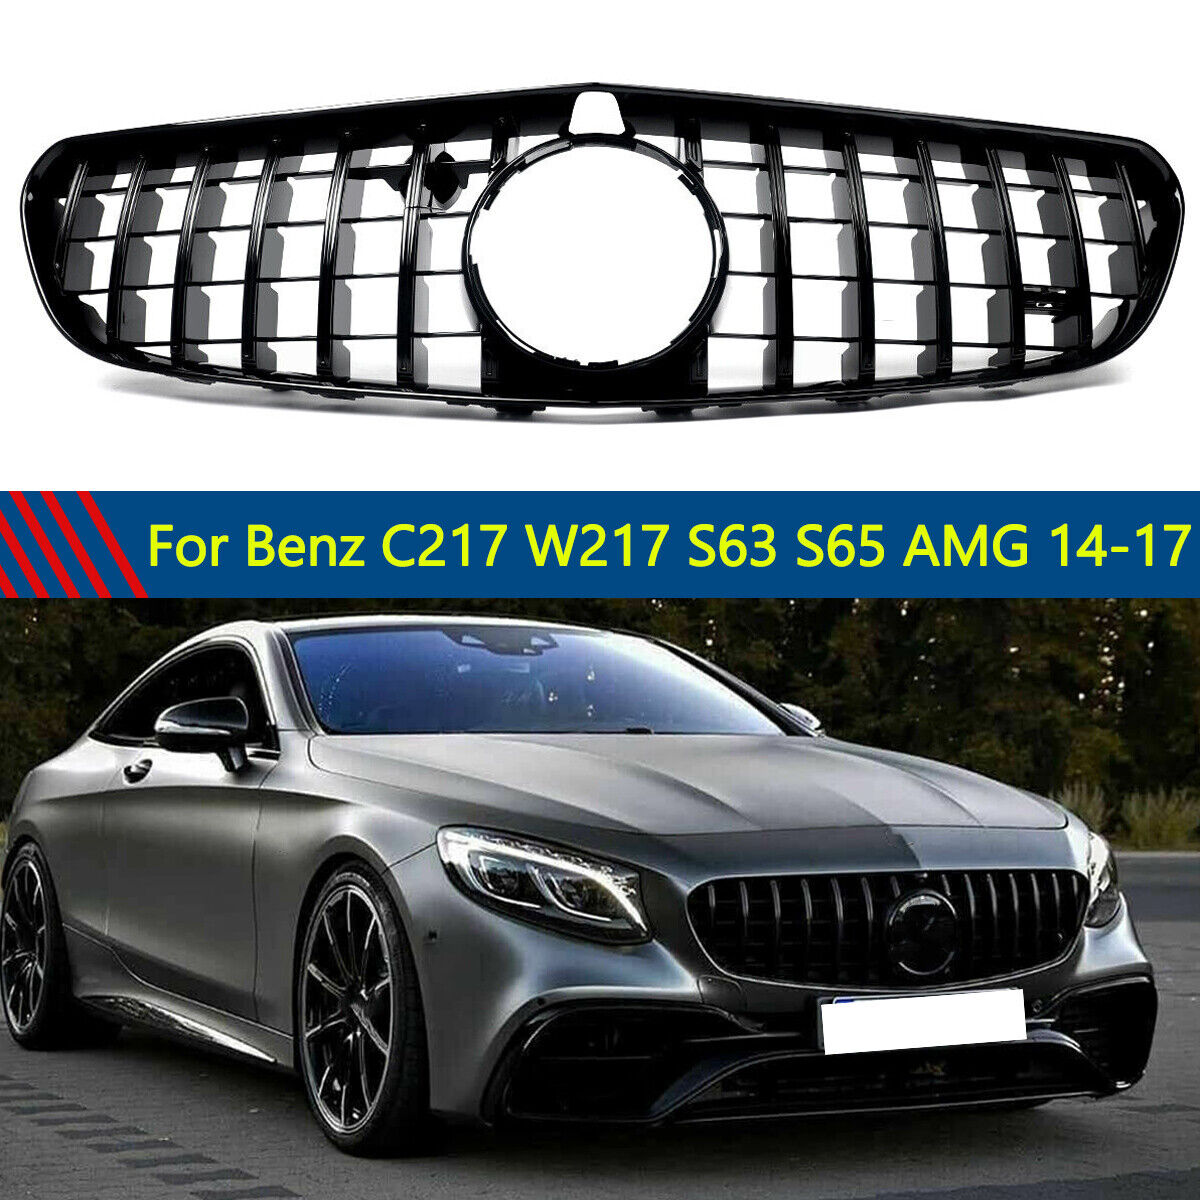 GT Grille Gloss Black For Benz W217 C217 S63 S65 AMG Coupe 2014-2017 Convertible